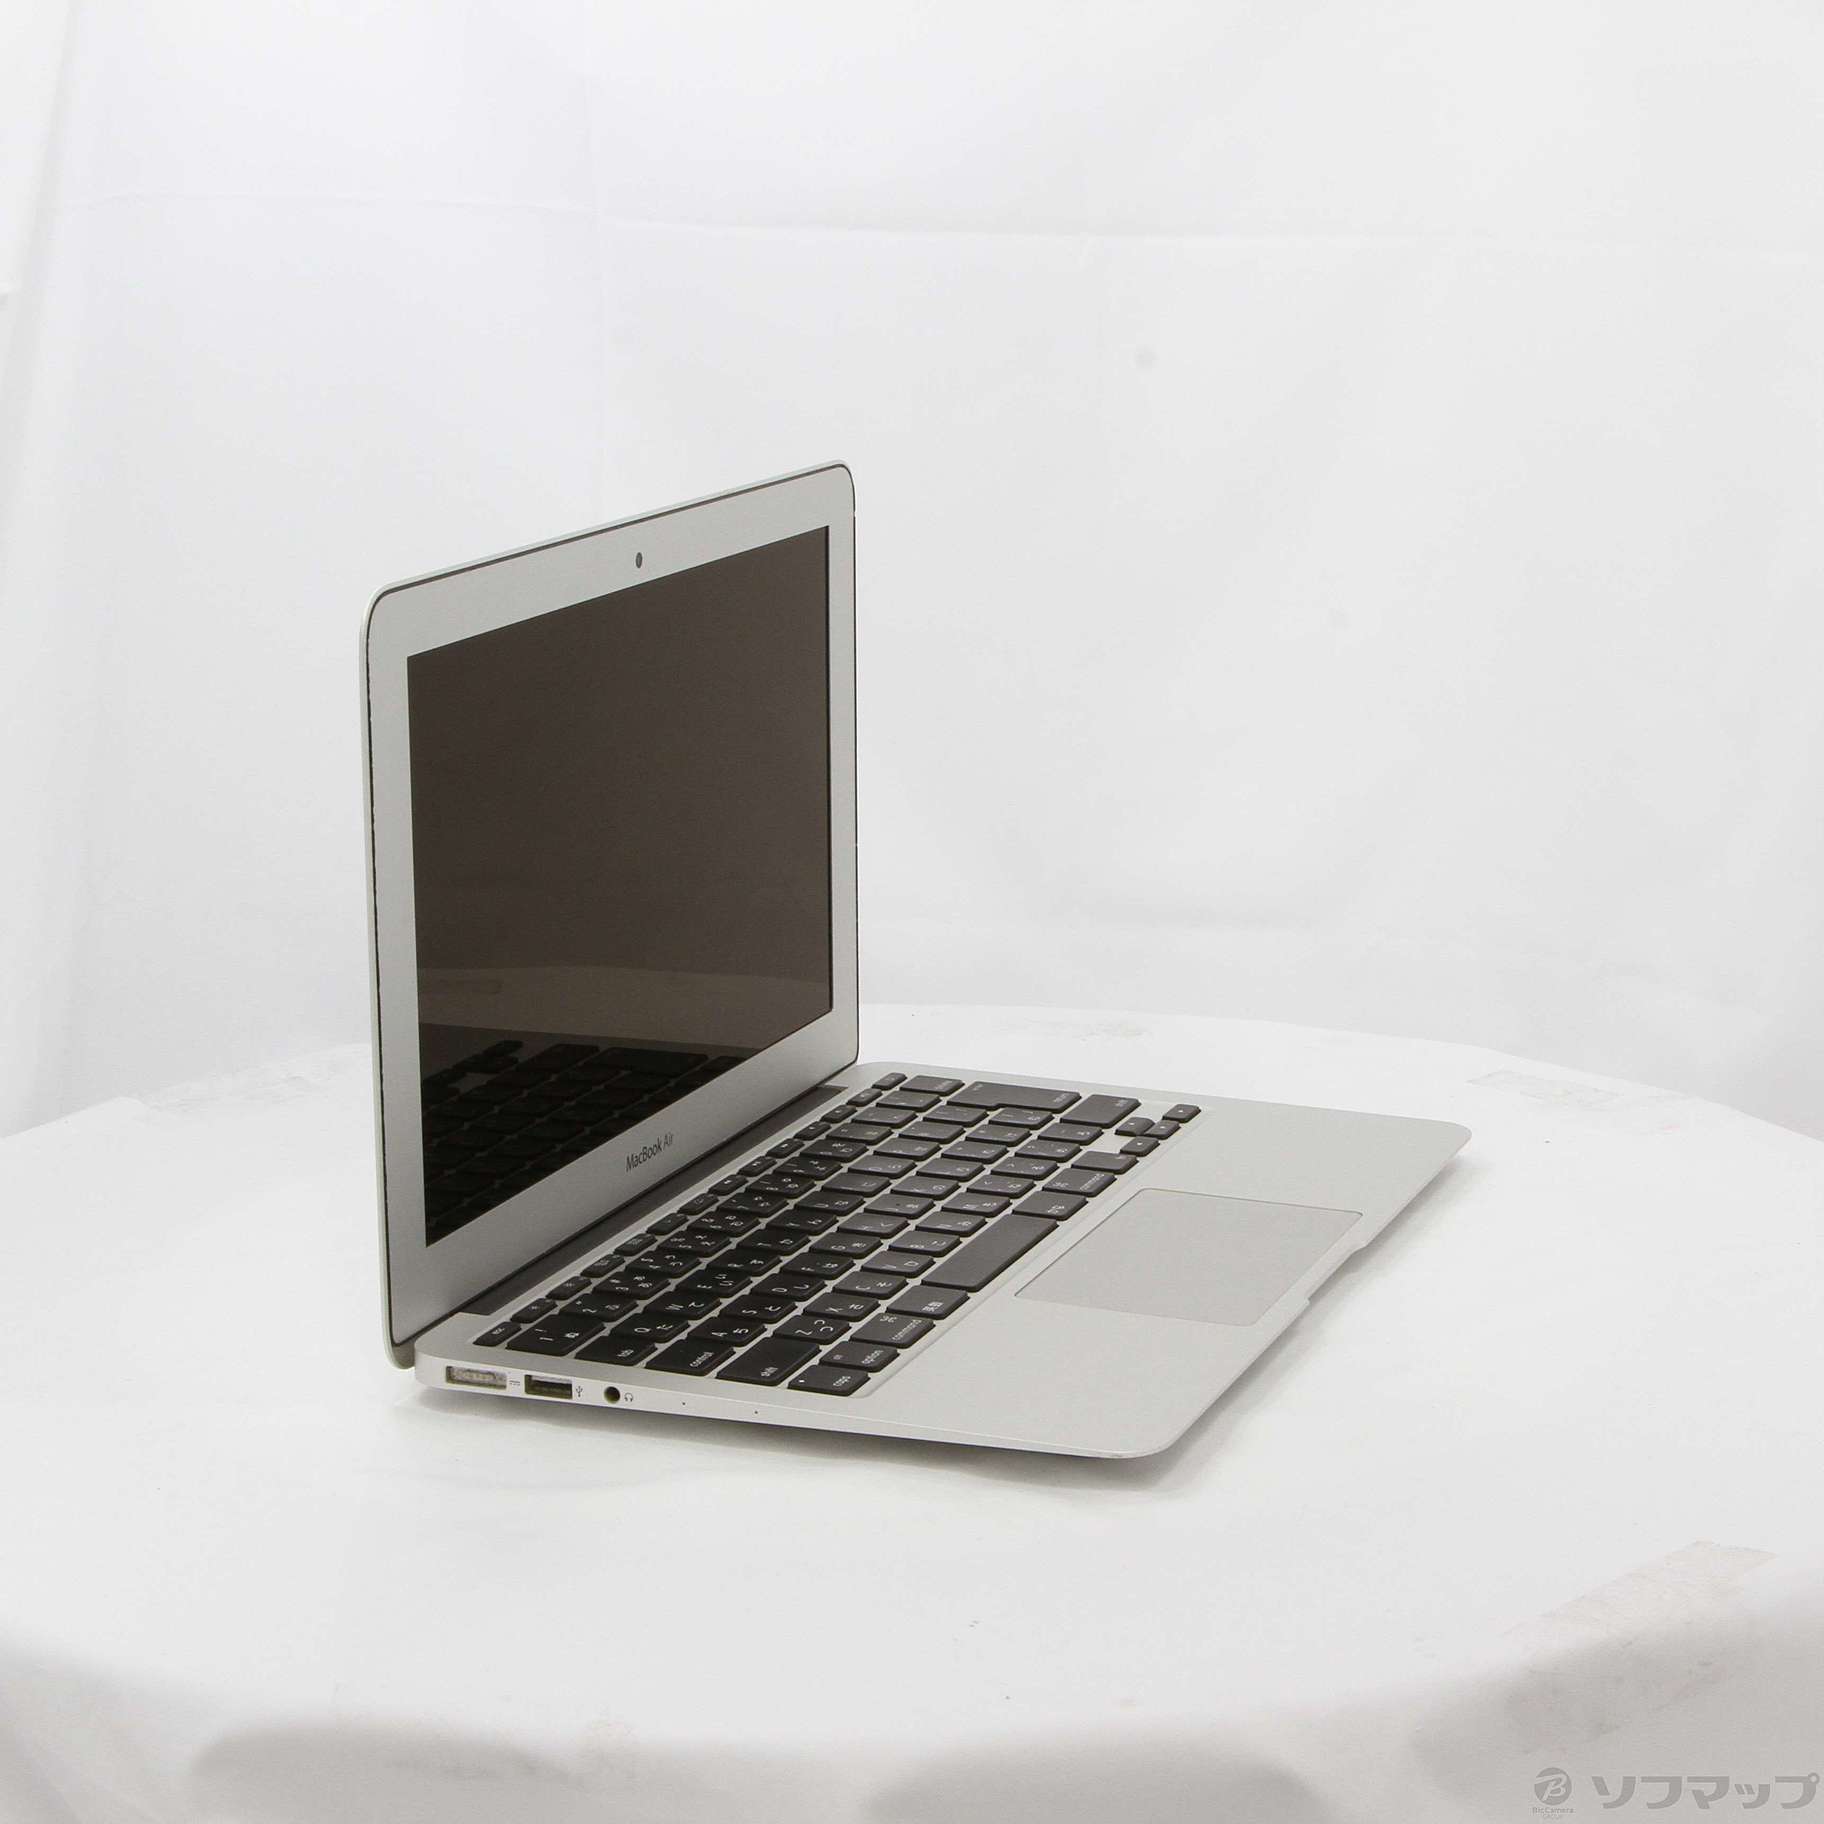 MacBook Air 11.6-inch Mid 2013 MD711J／A Core_i5 1.3GHz 4GB SSD128GB 〔10.8  MountainLion〕 ◇04/01(木)値下げ！